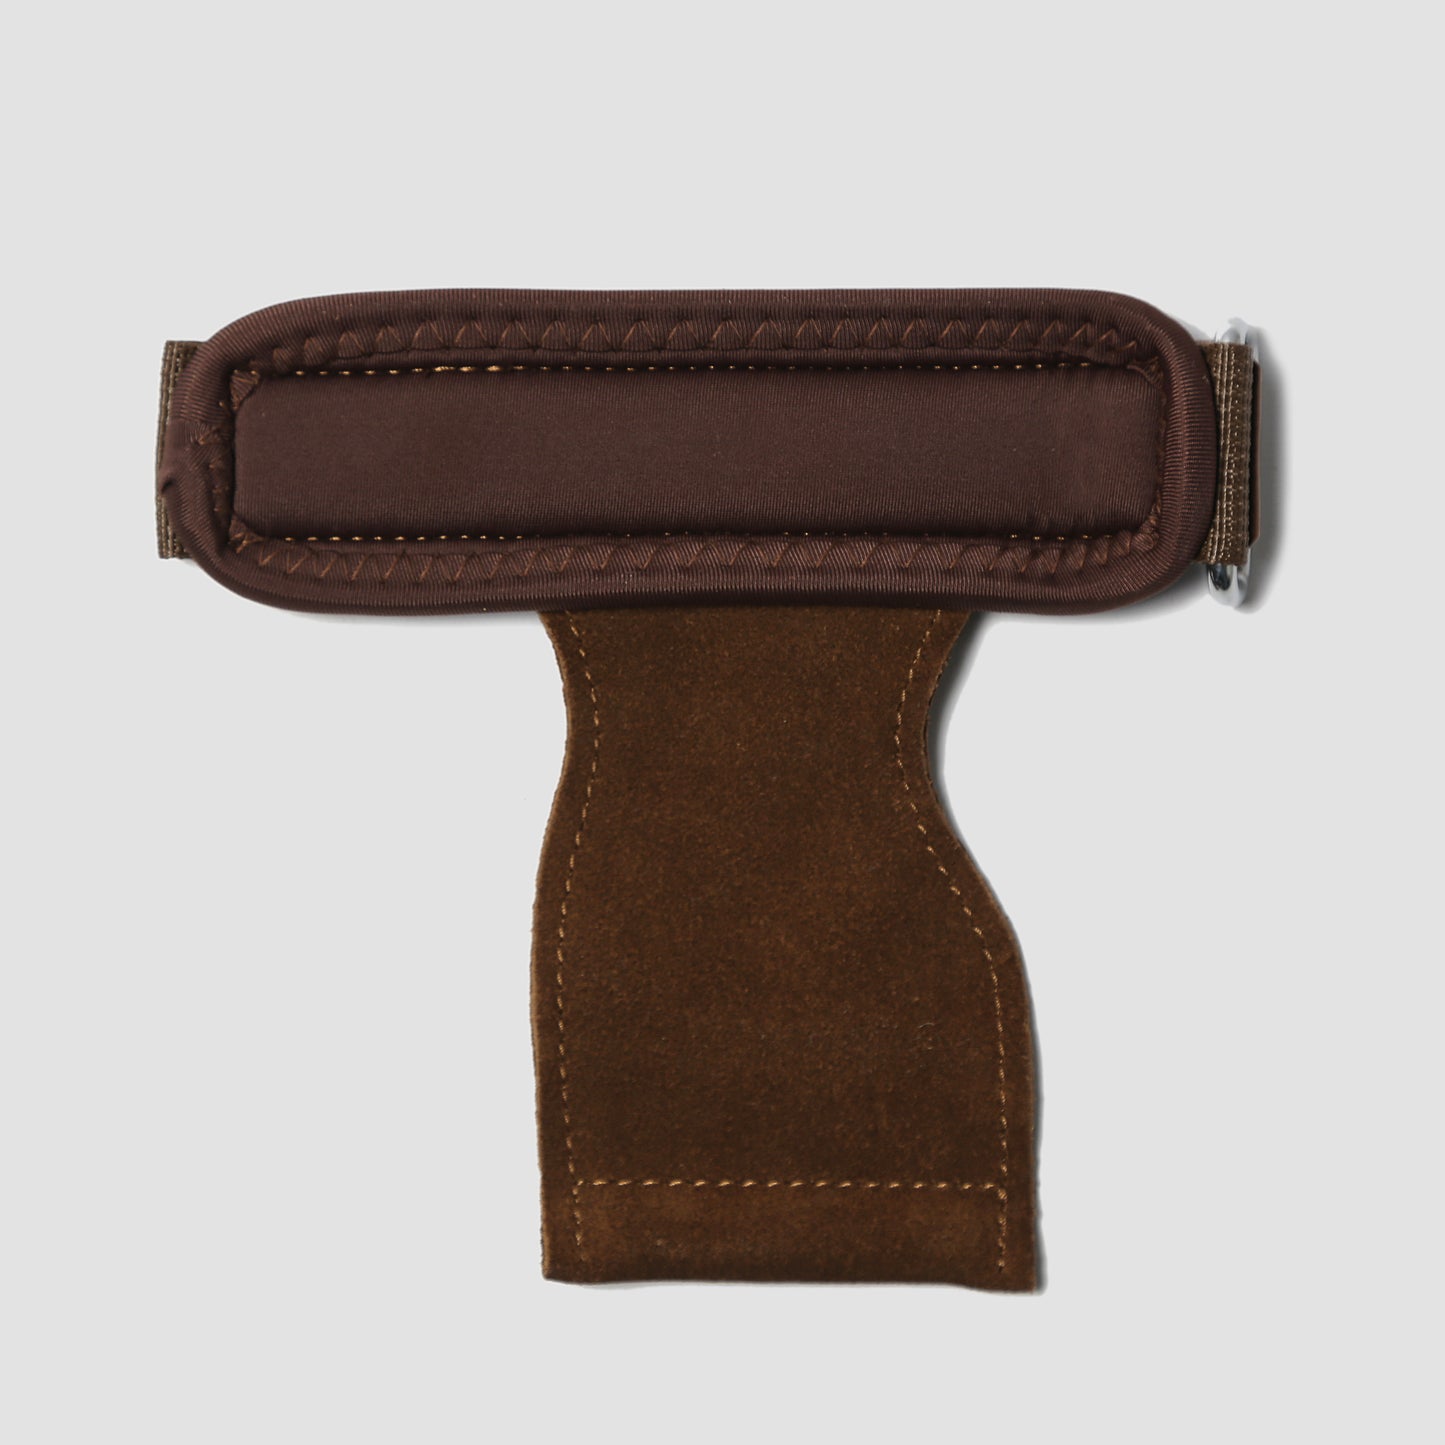 Leather Lifting Grip Wraps // Brown Leather